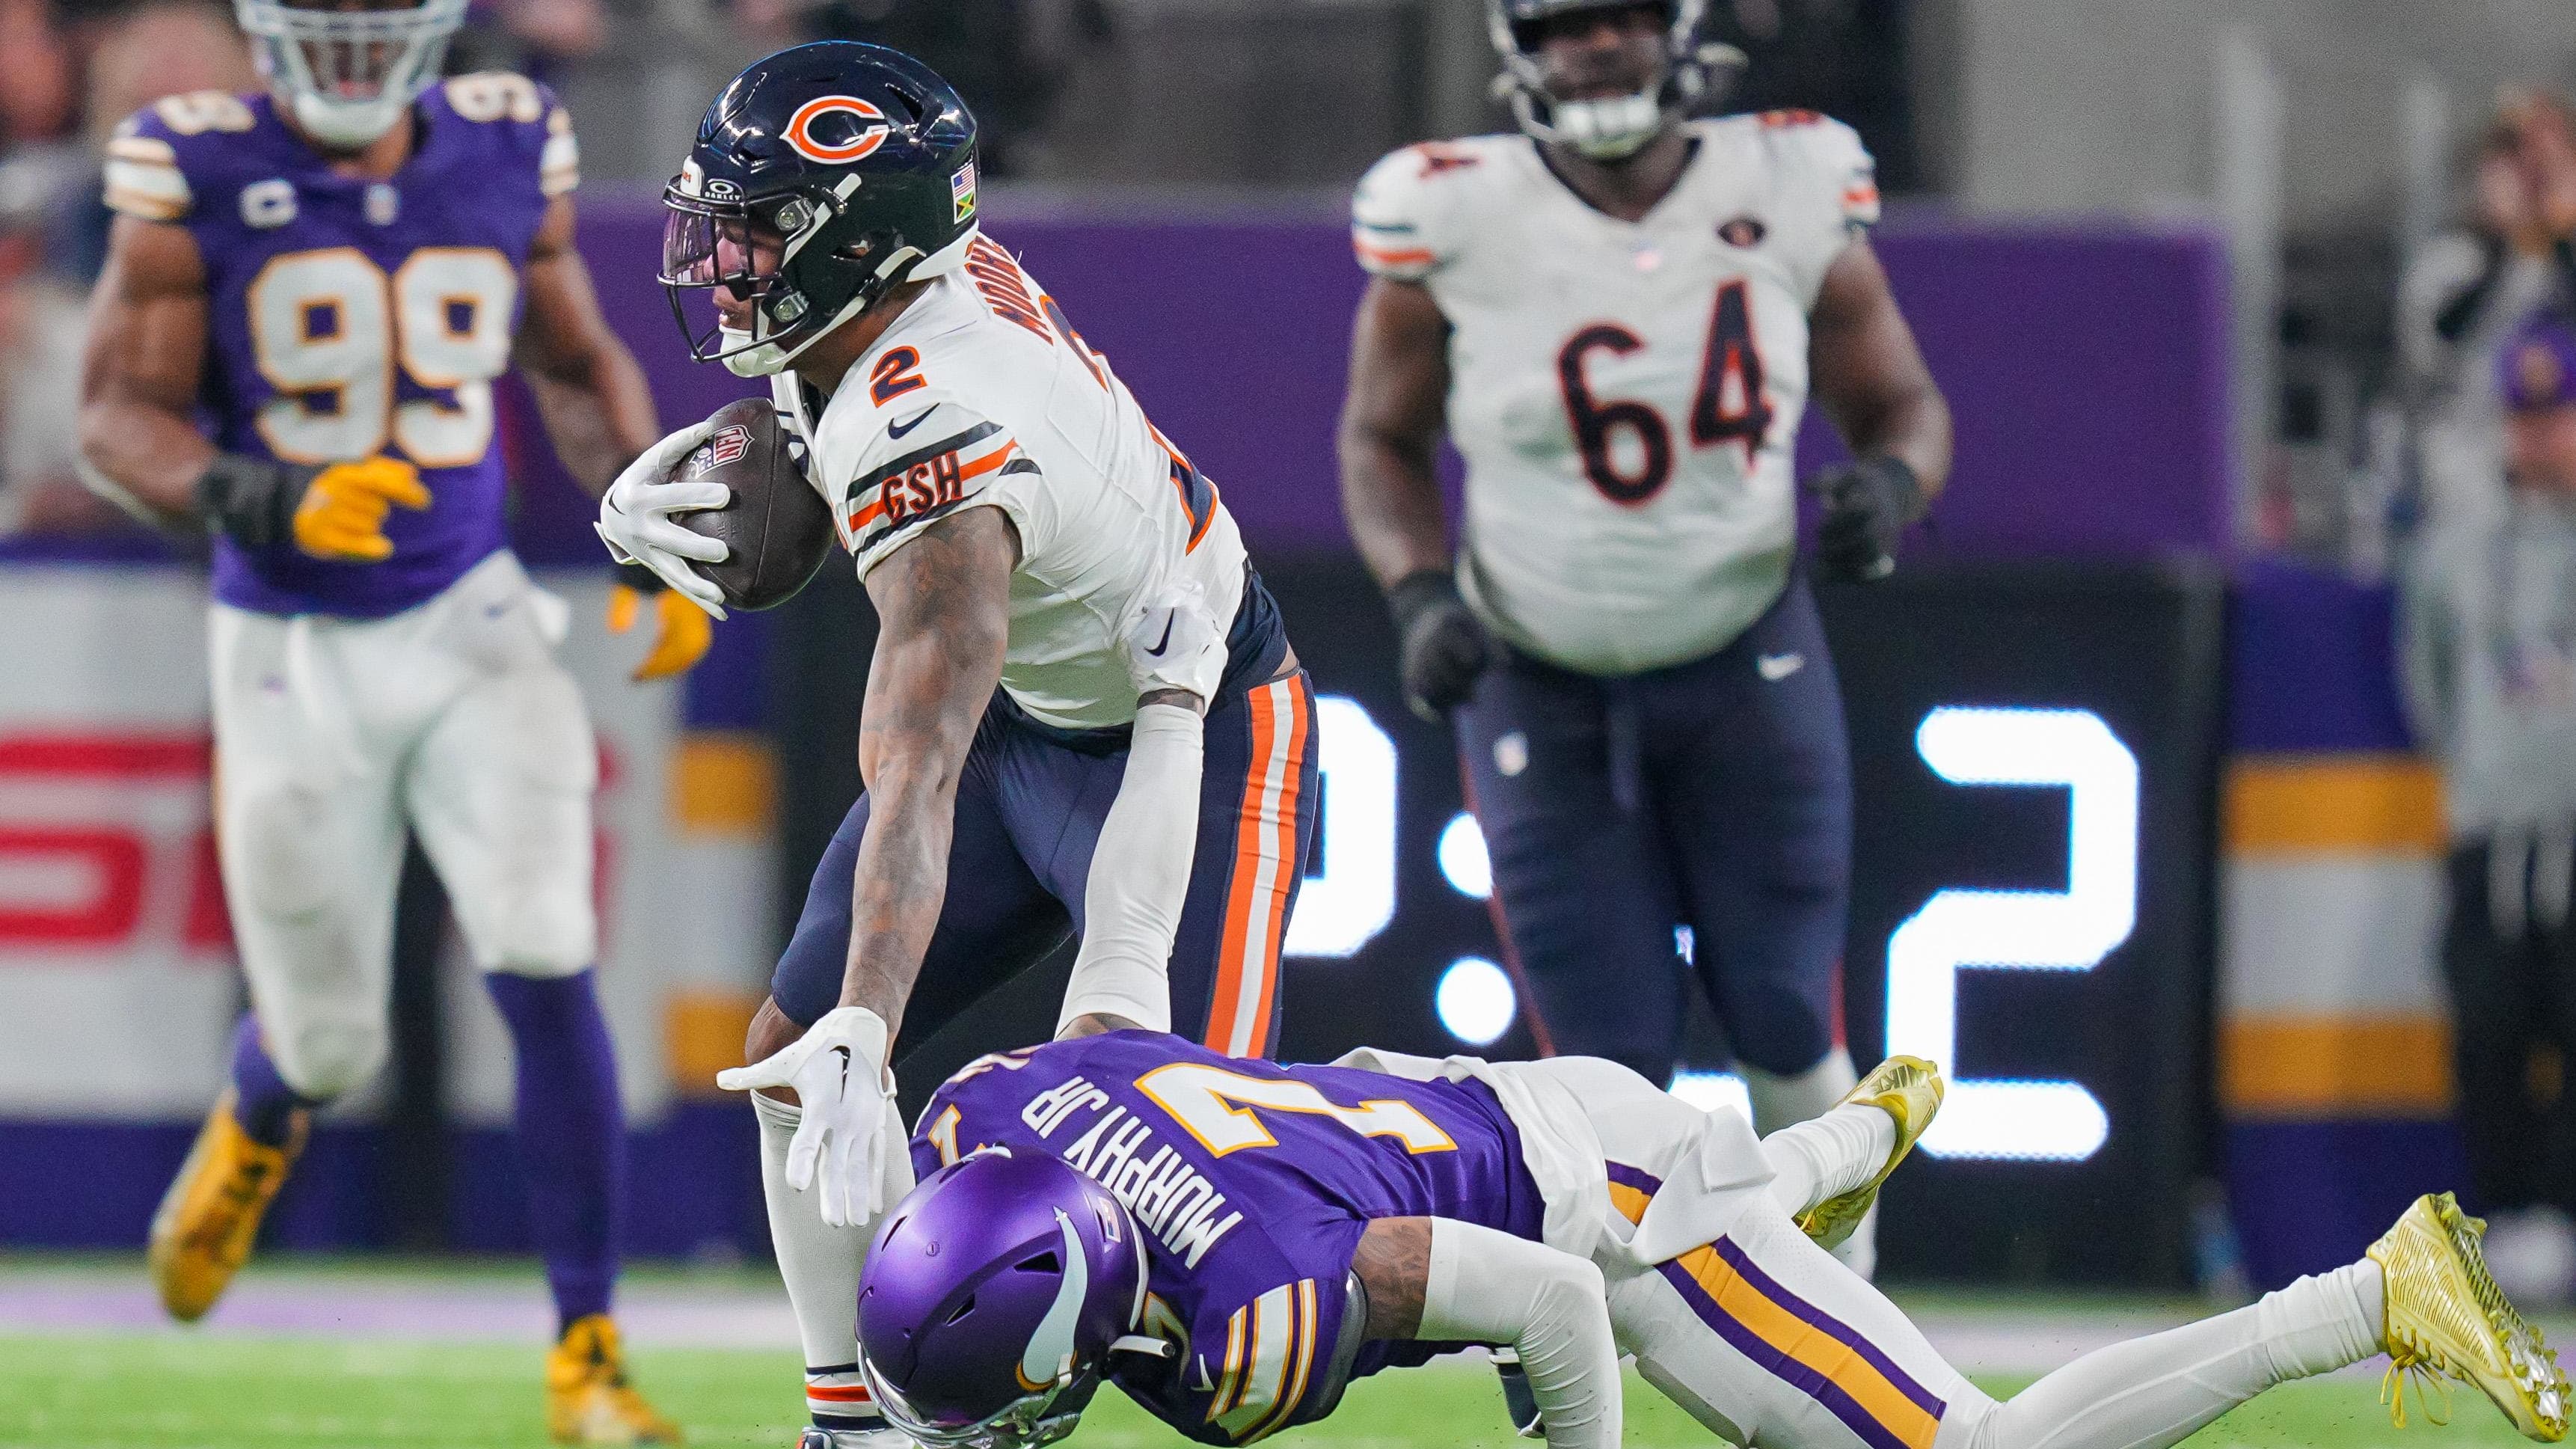 DJ Moore hauls in a catch against Minnesota. Bears offensive firepower should attract network interest on the NFL schedule.